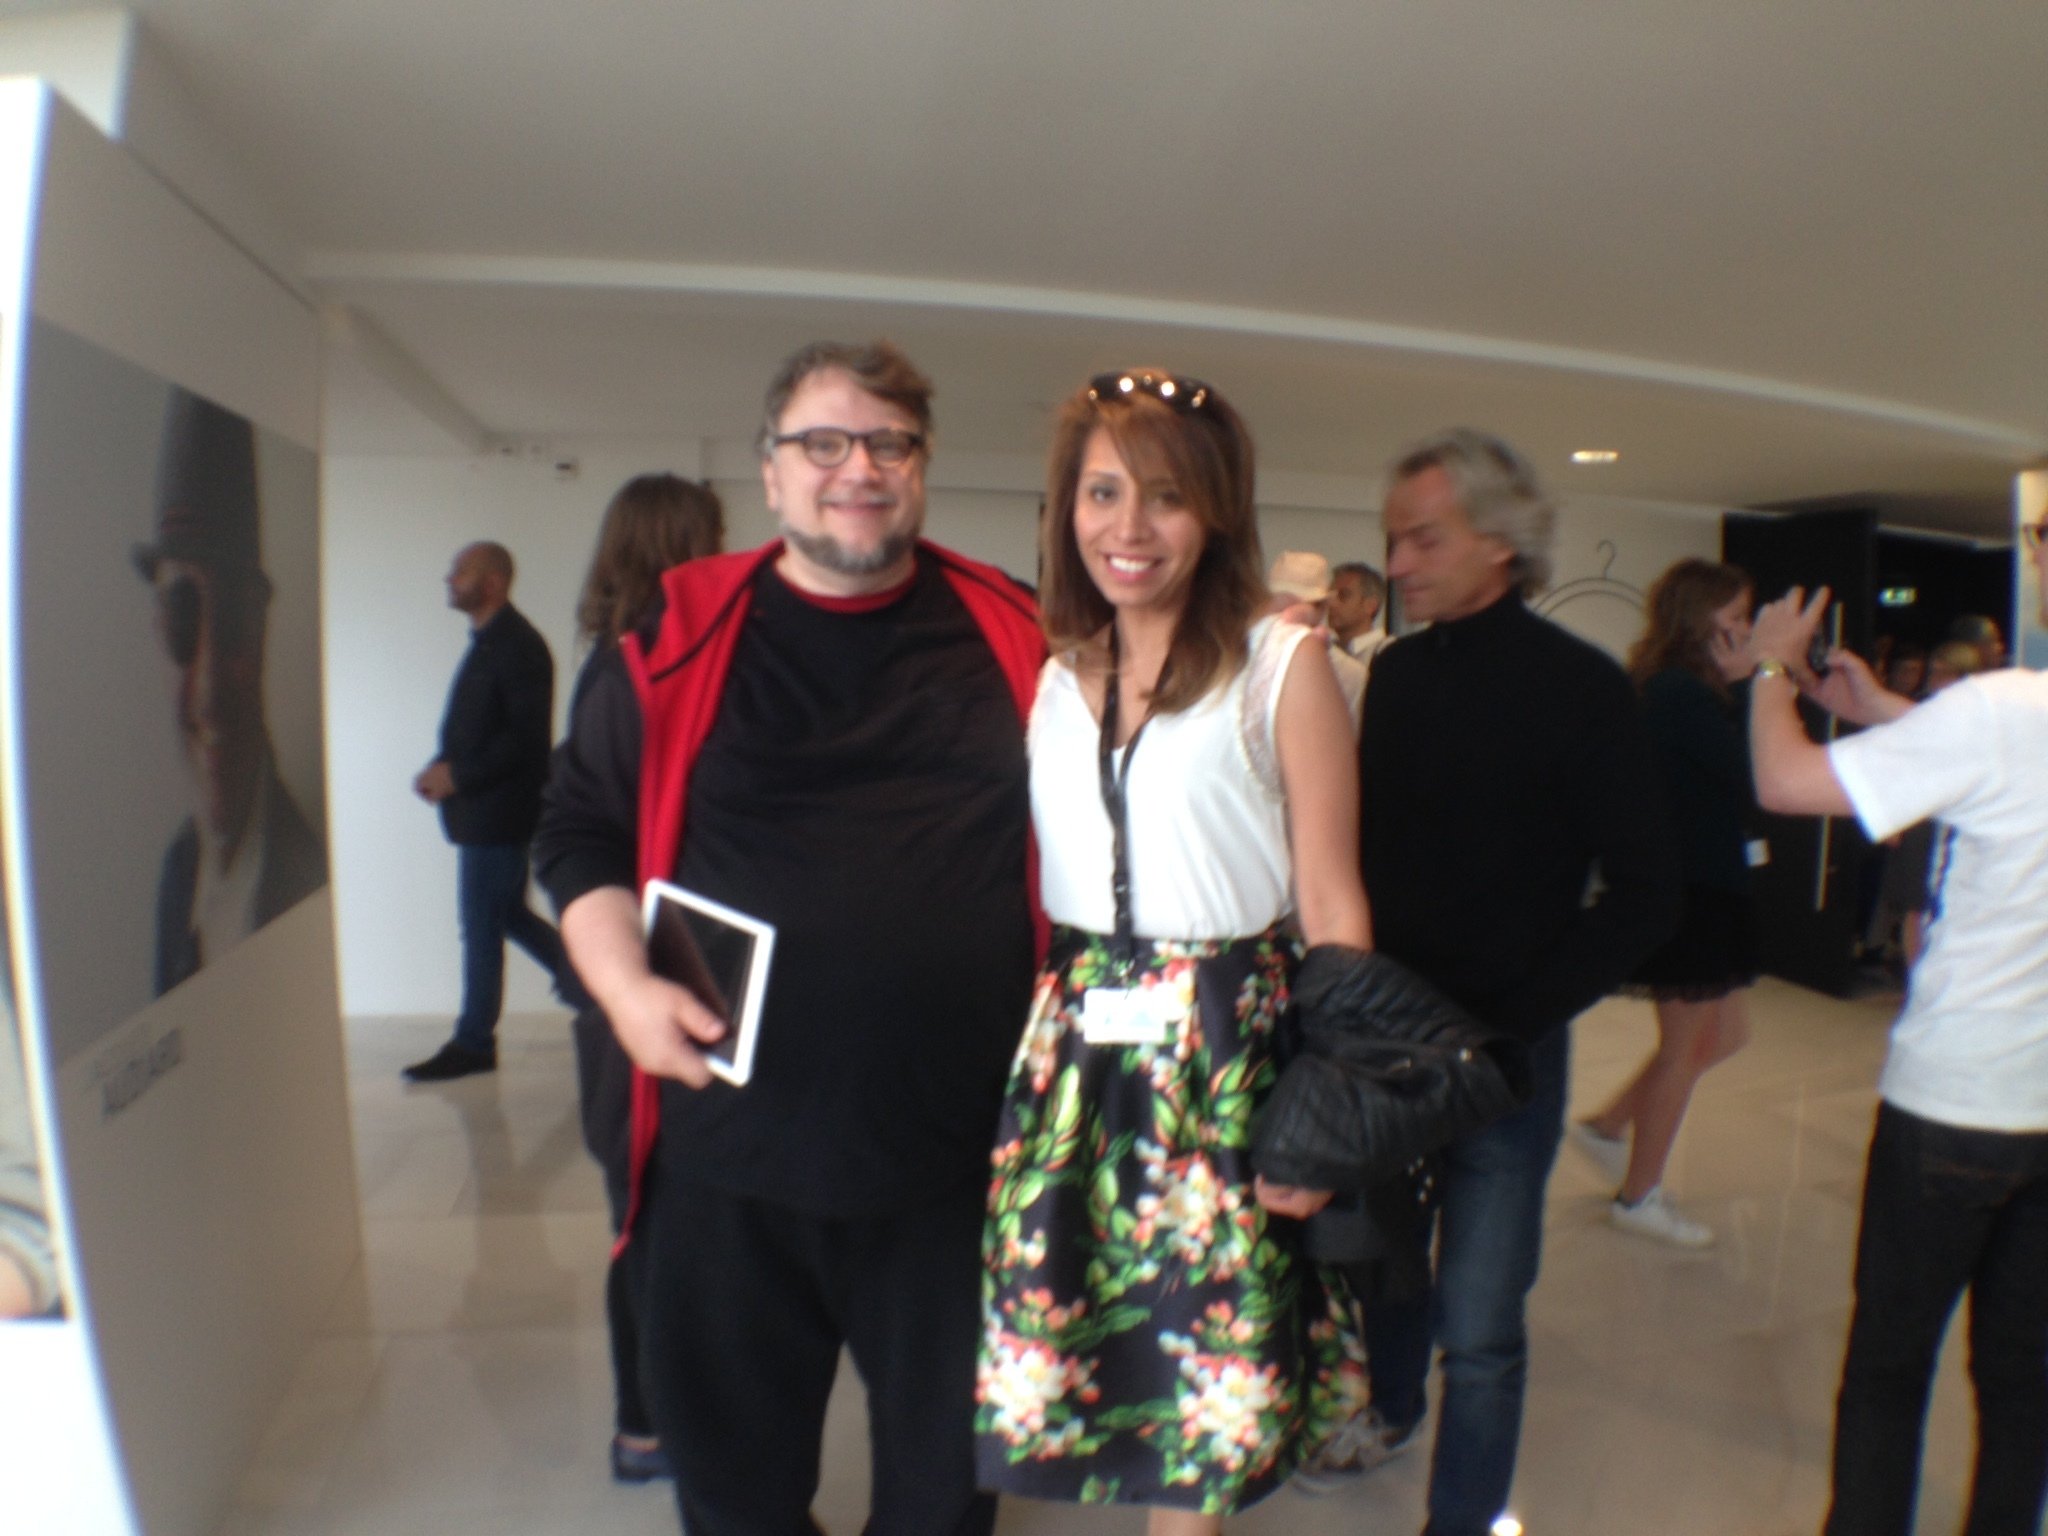 Isis Kiwen and Guillermo del Toro at Cannes Film Festival, 2015. Isis Kiwen participates with 